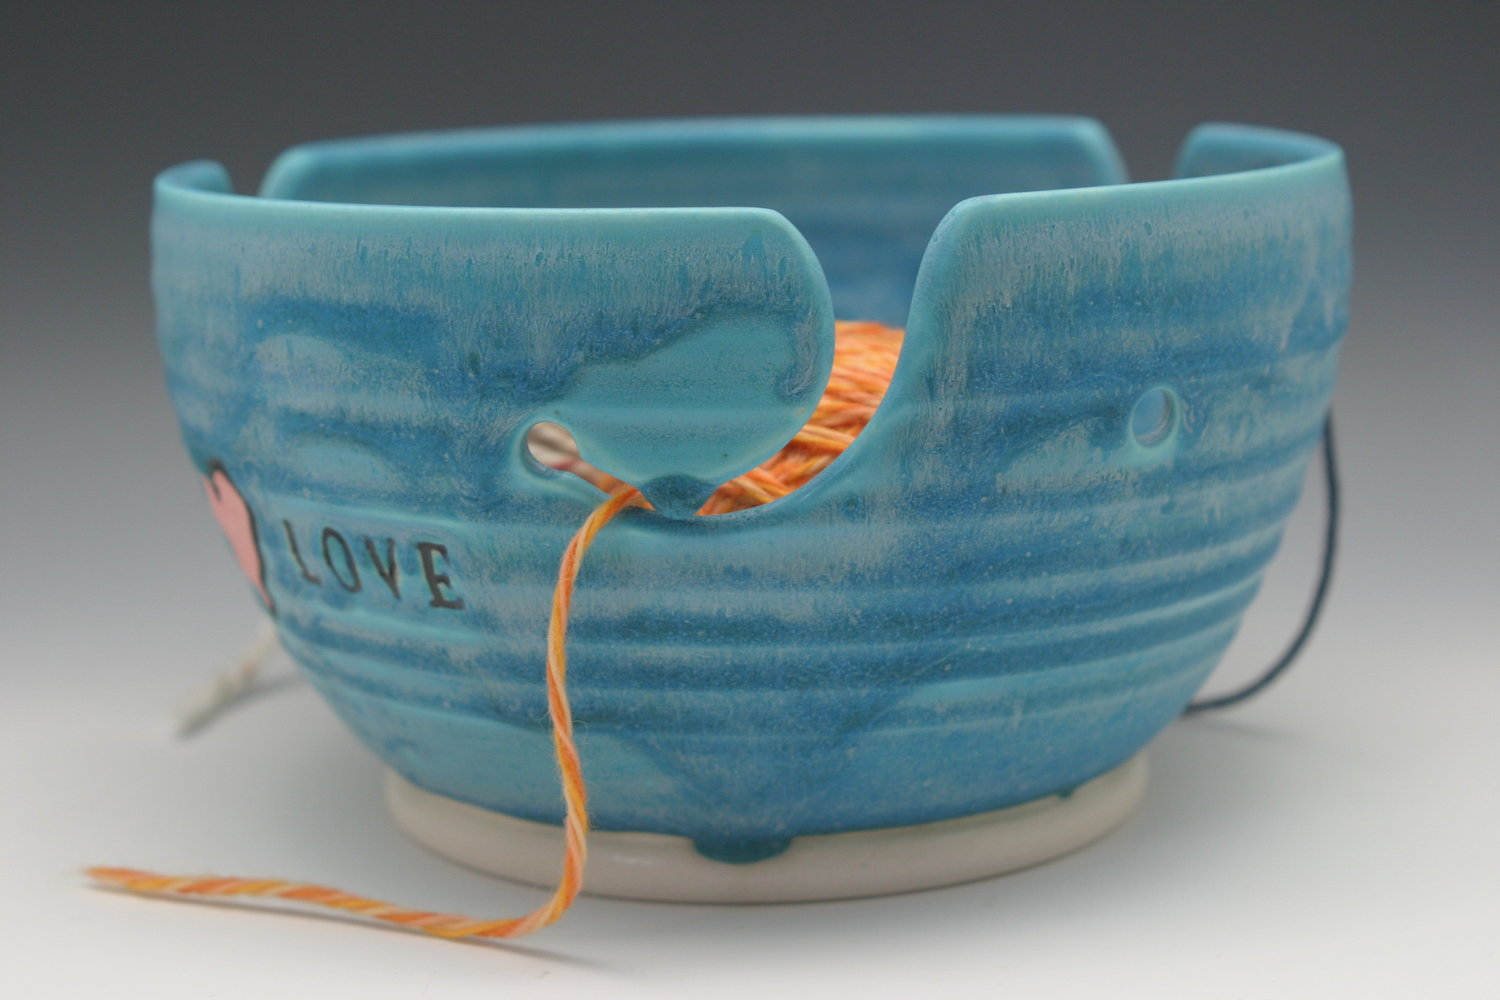 Best yarn bowls for knitting and crochet - Gathered